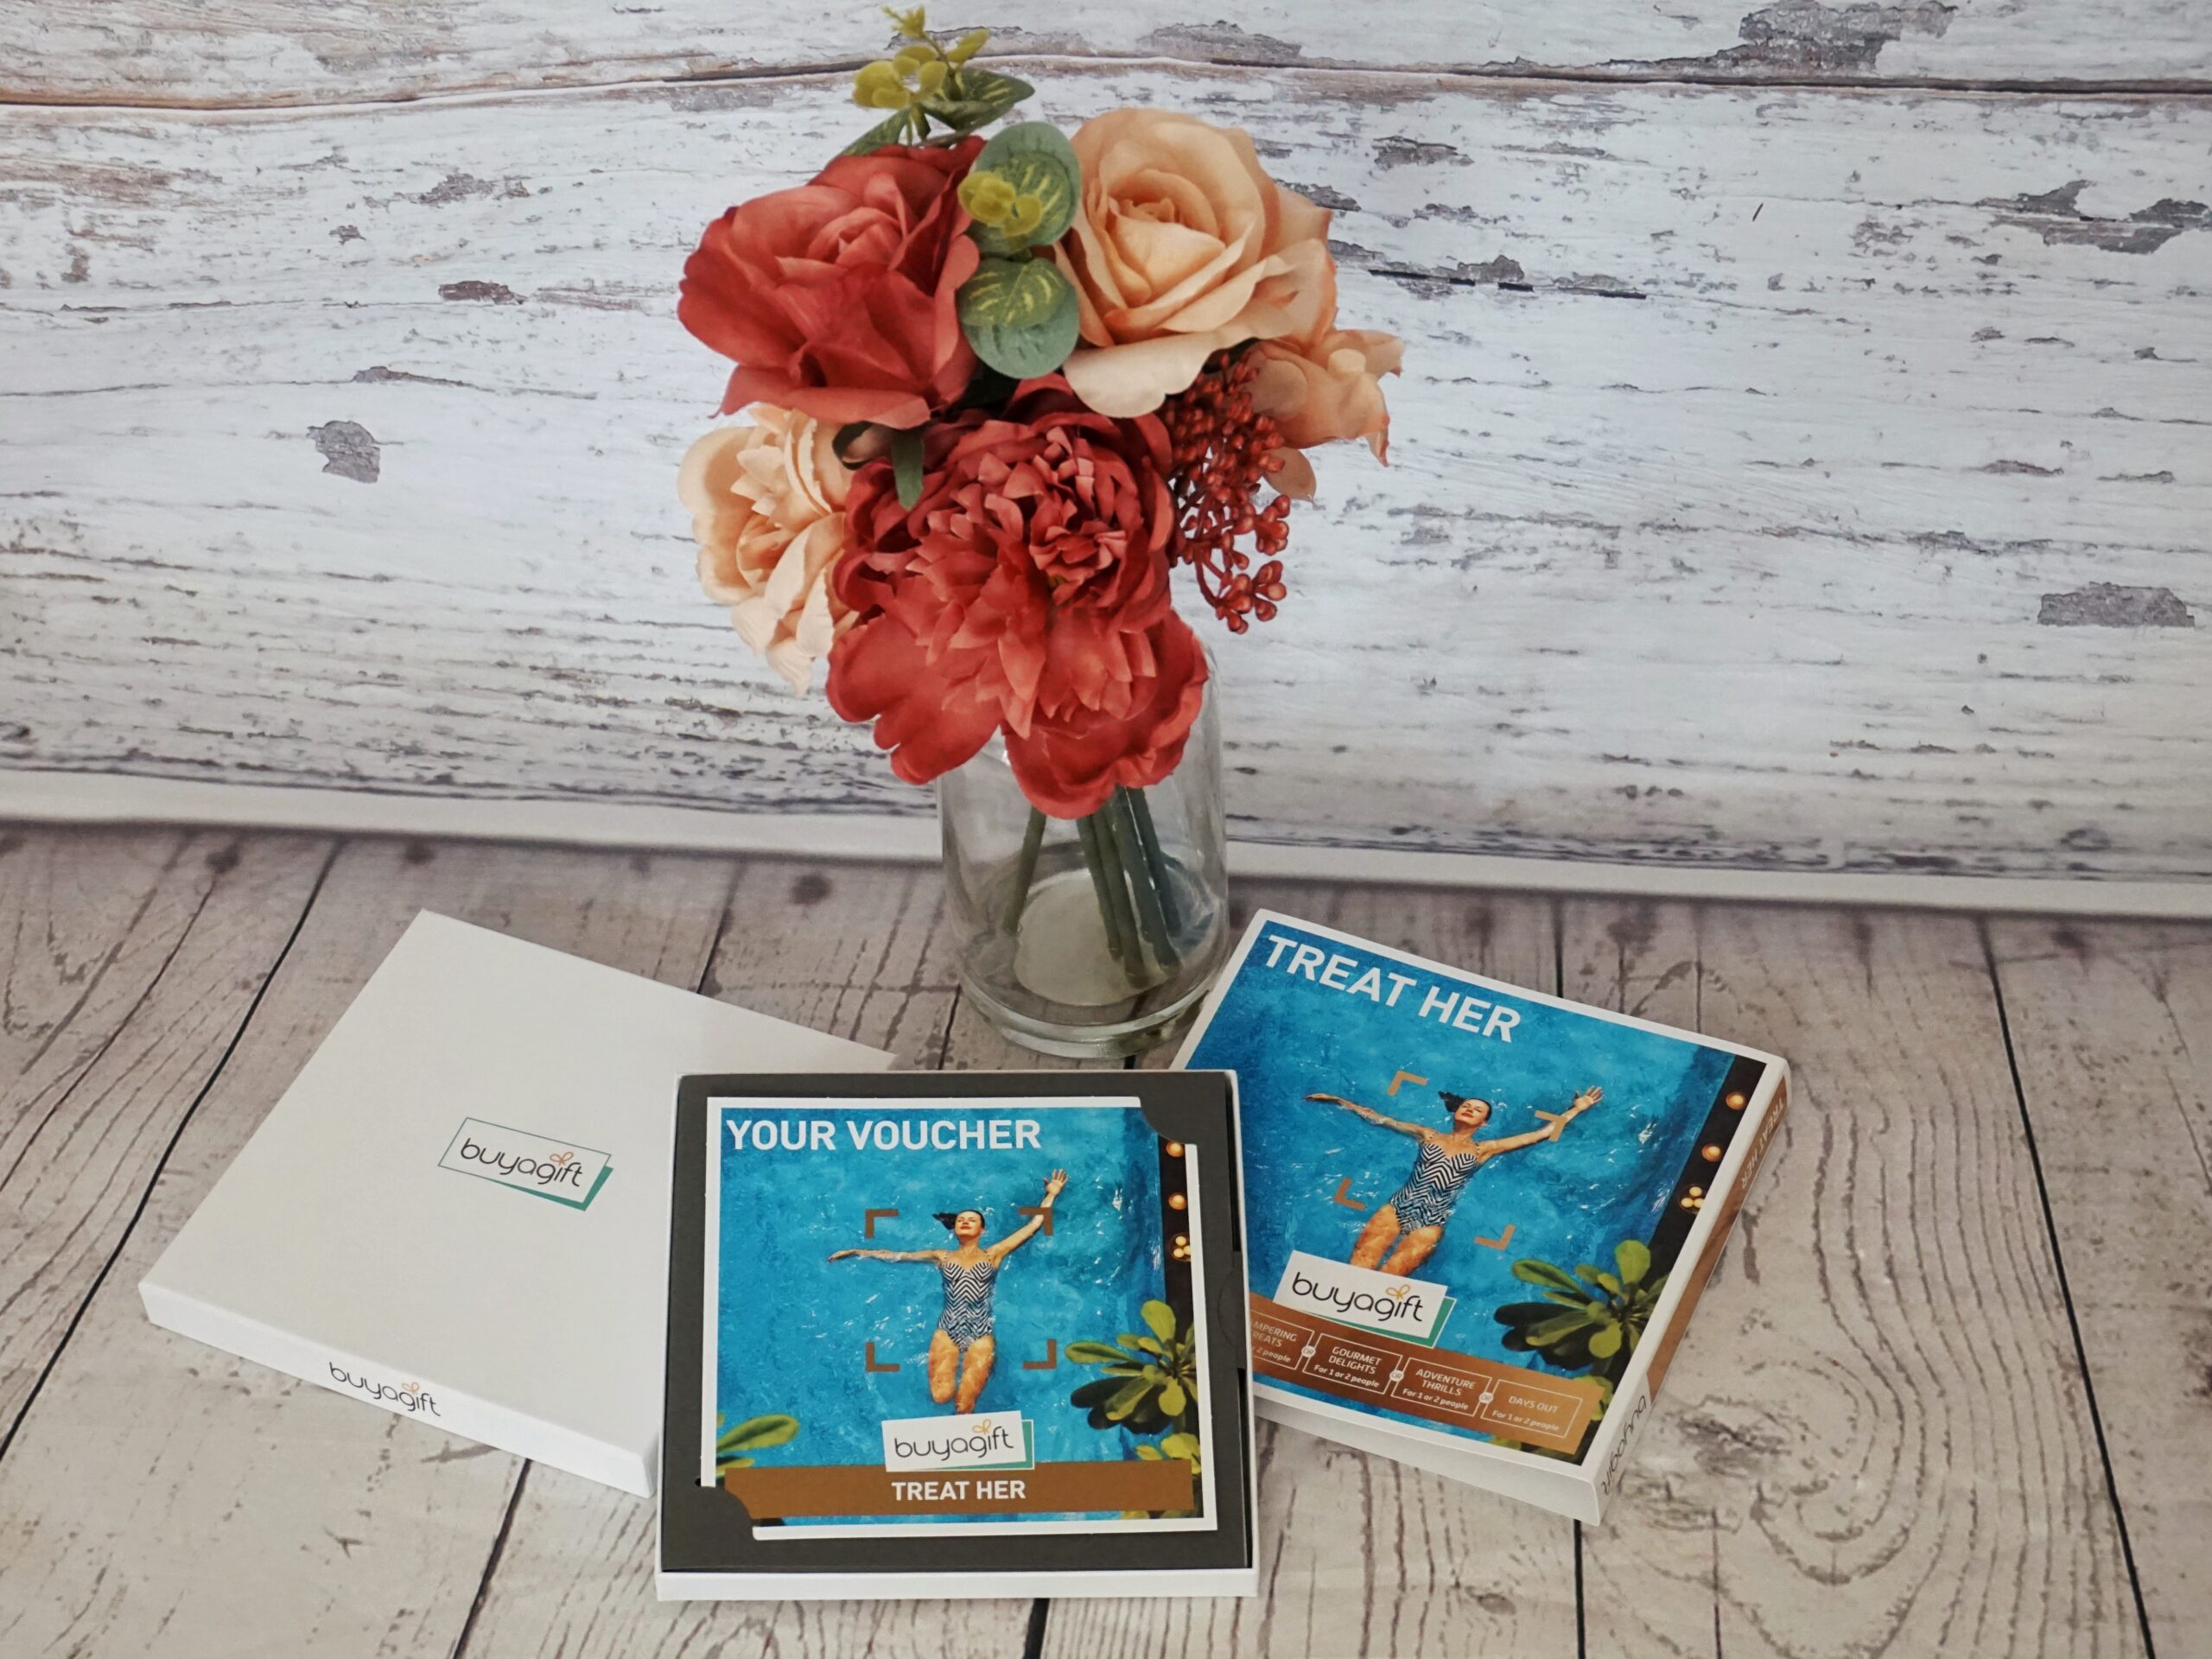 Treat her buy a gift voucher presented on a wooden background with a vase of red and peach flowers behind. Vouchers make great Ethical Mother's Day Gifts allowing mums to choose their own experience.  